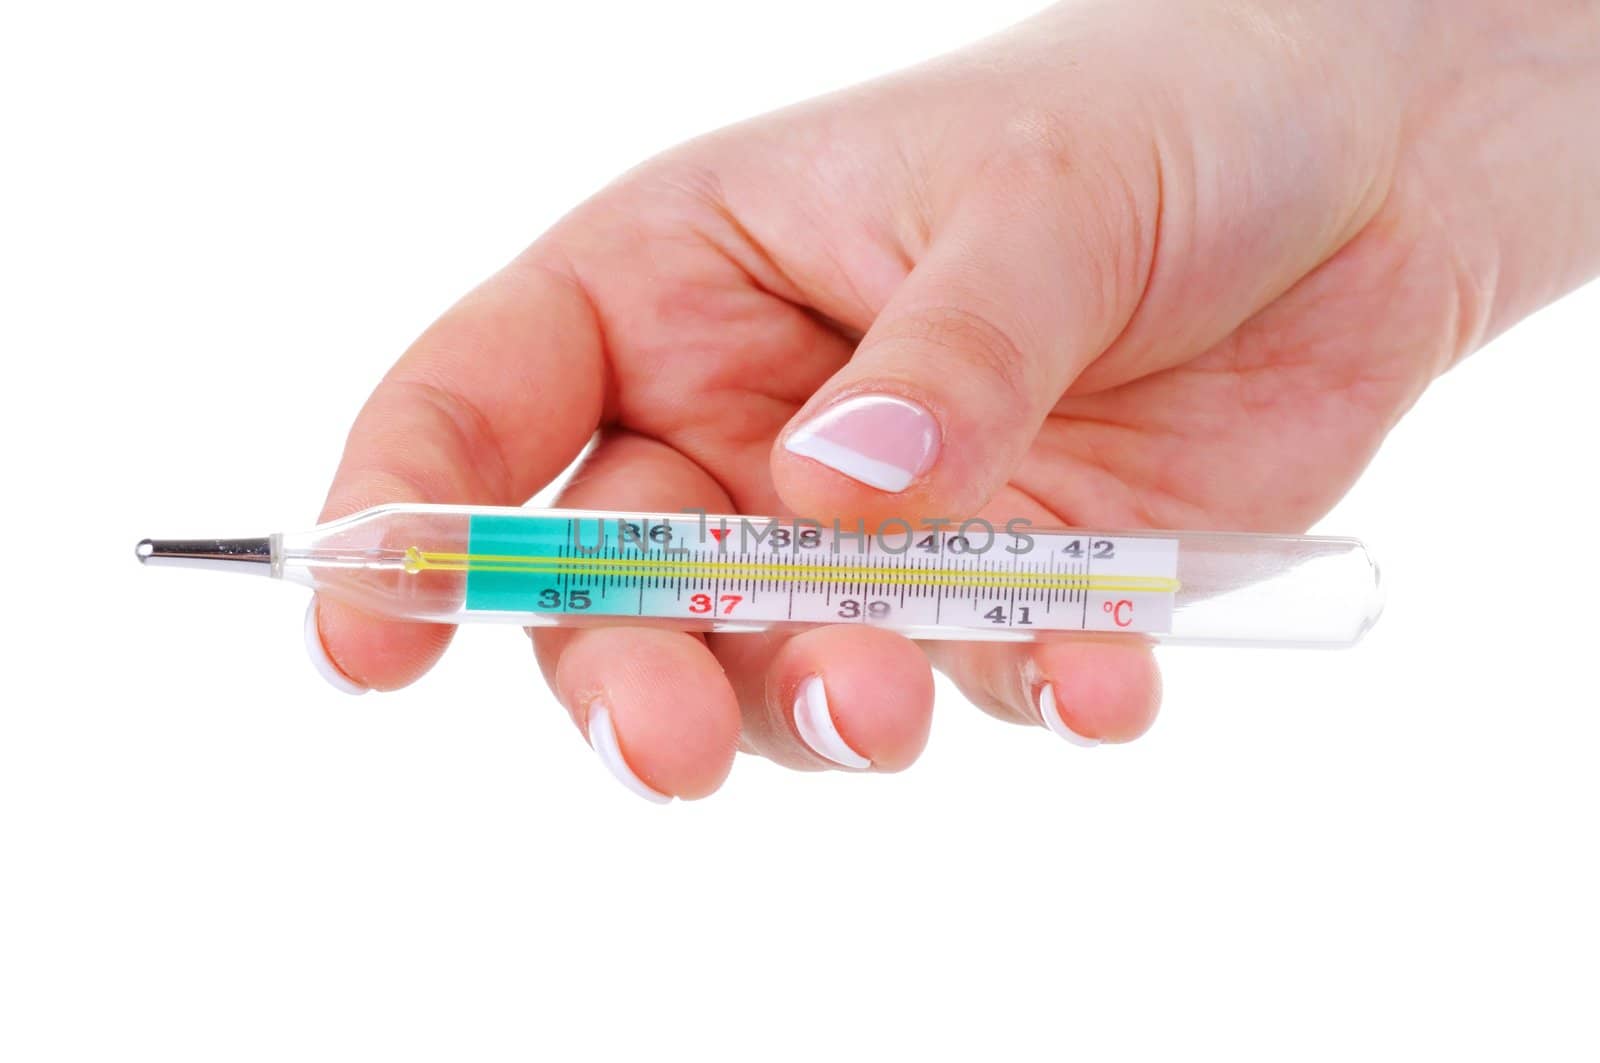 Mercury thermometer in female hand on white background